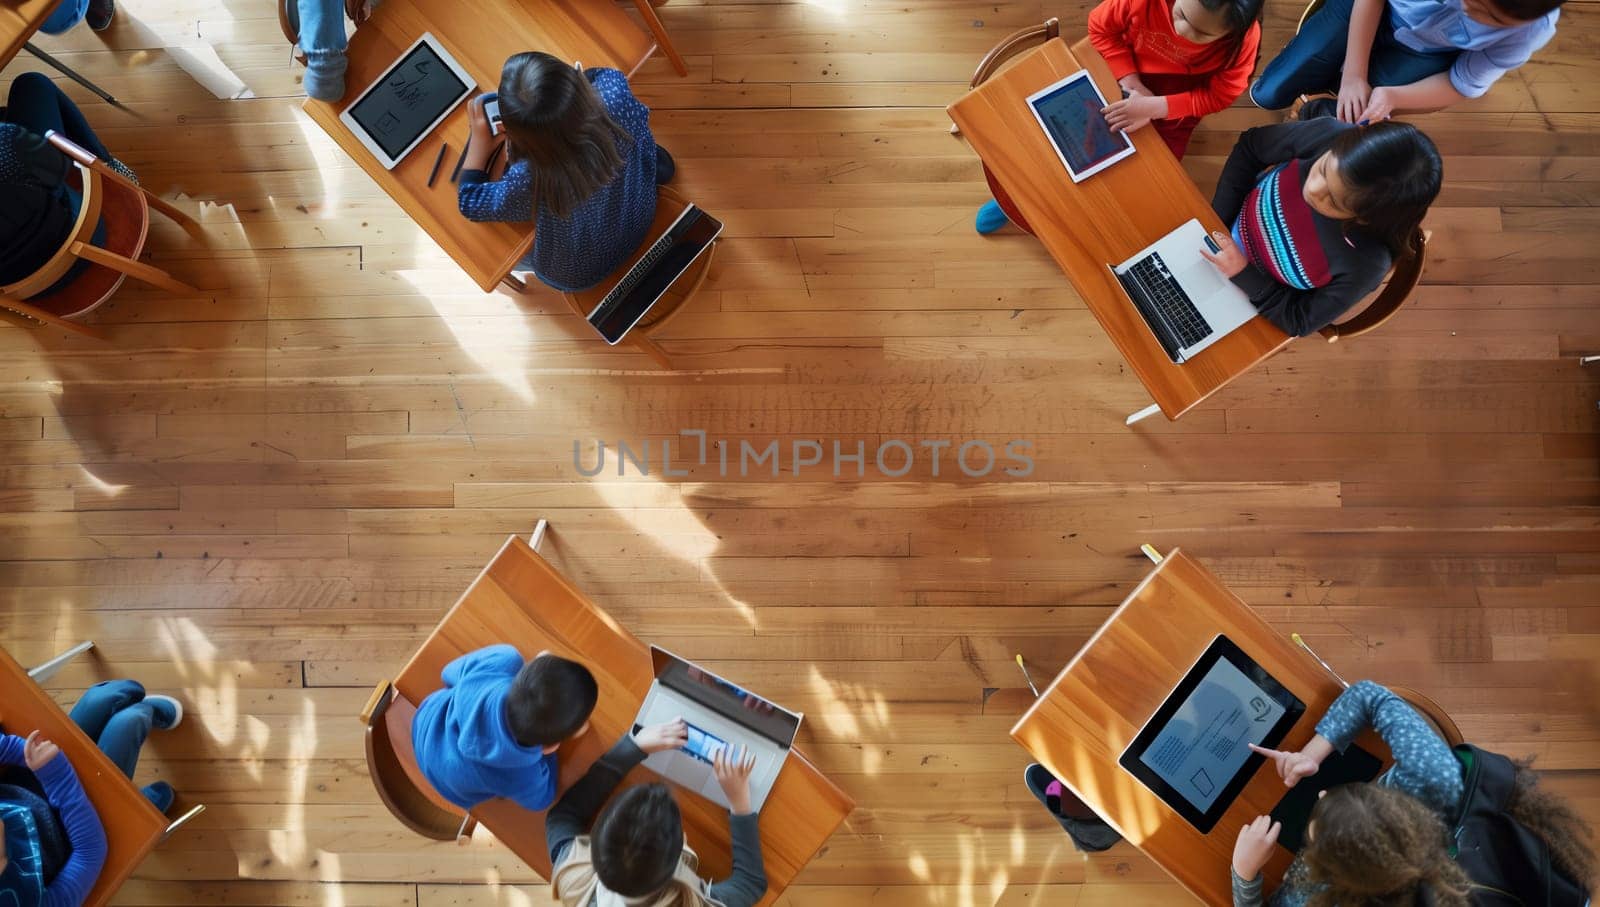 Group of individuals using laptops and tablets in a classroom setting by richwolf